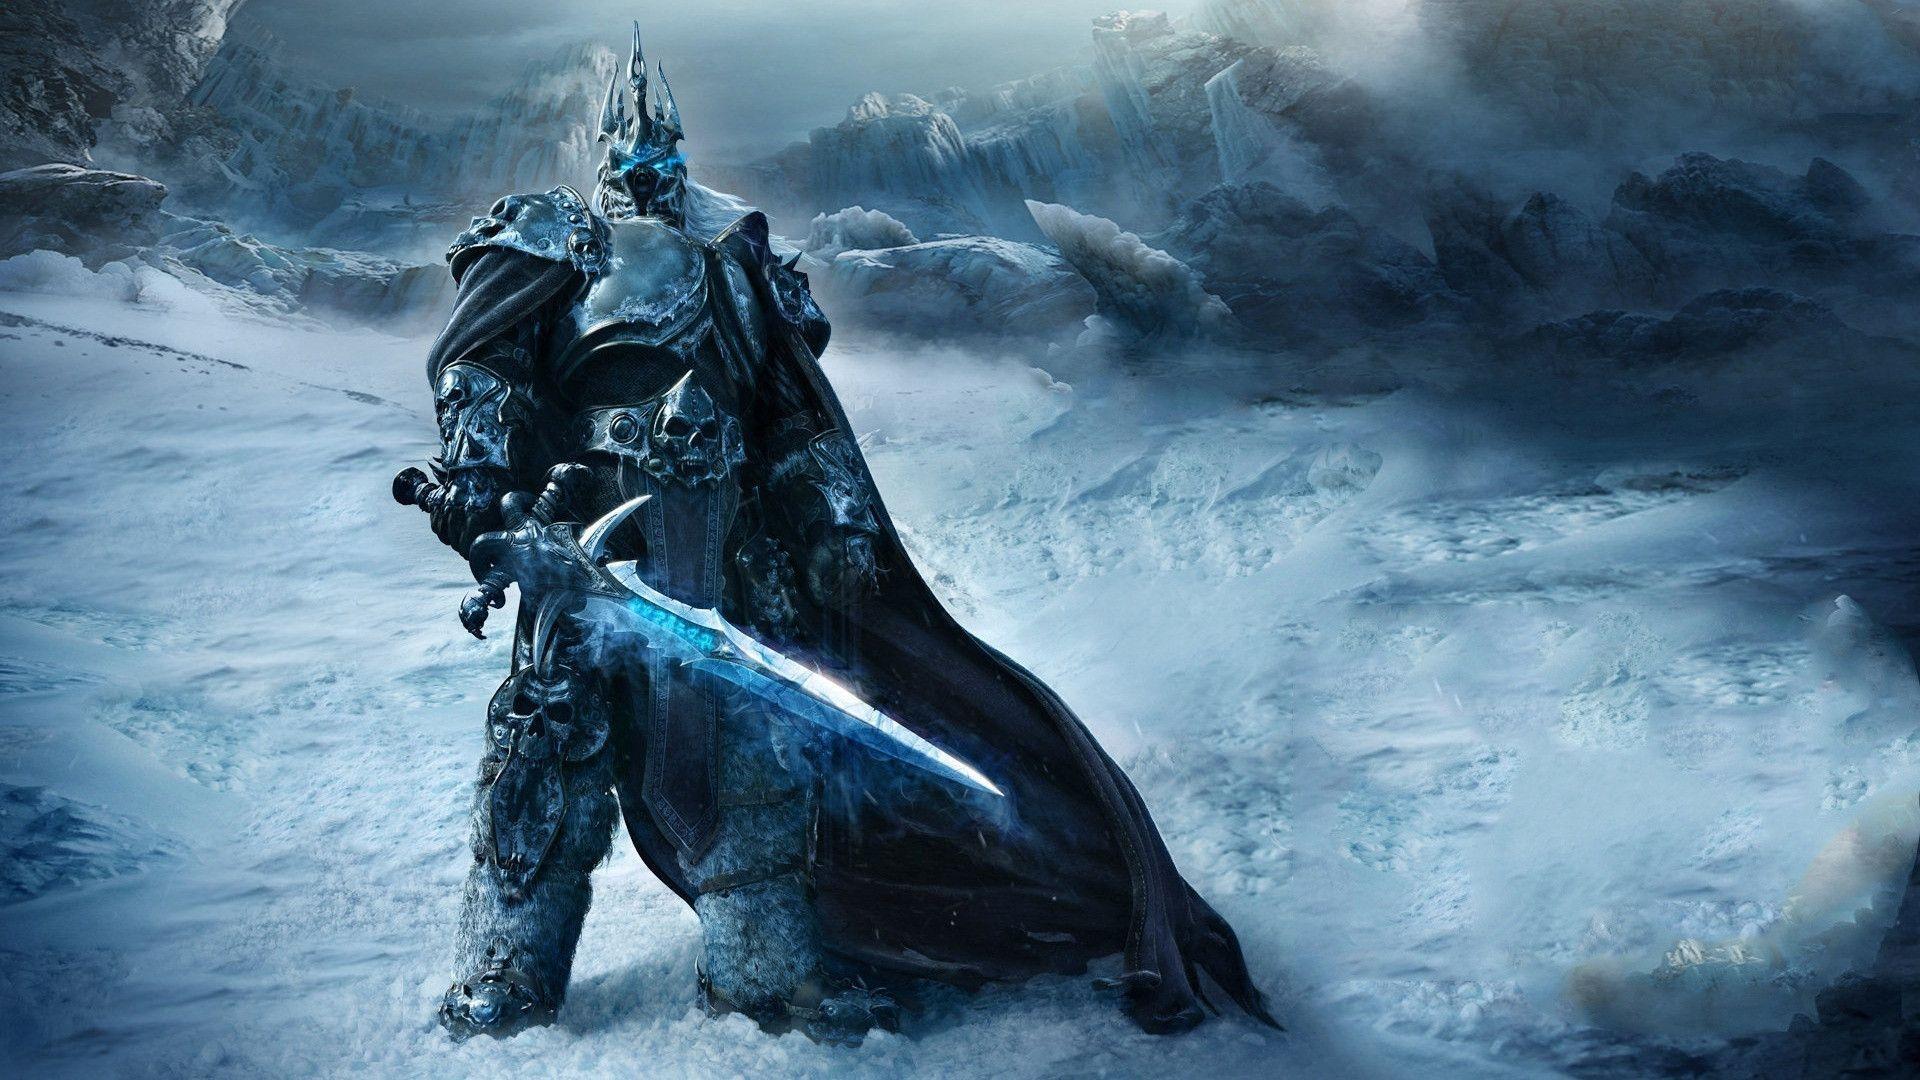 World of Warcraft: Wrath of the Lich King Wallpaper #